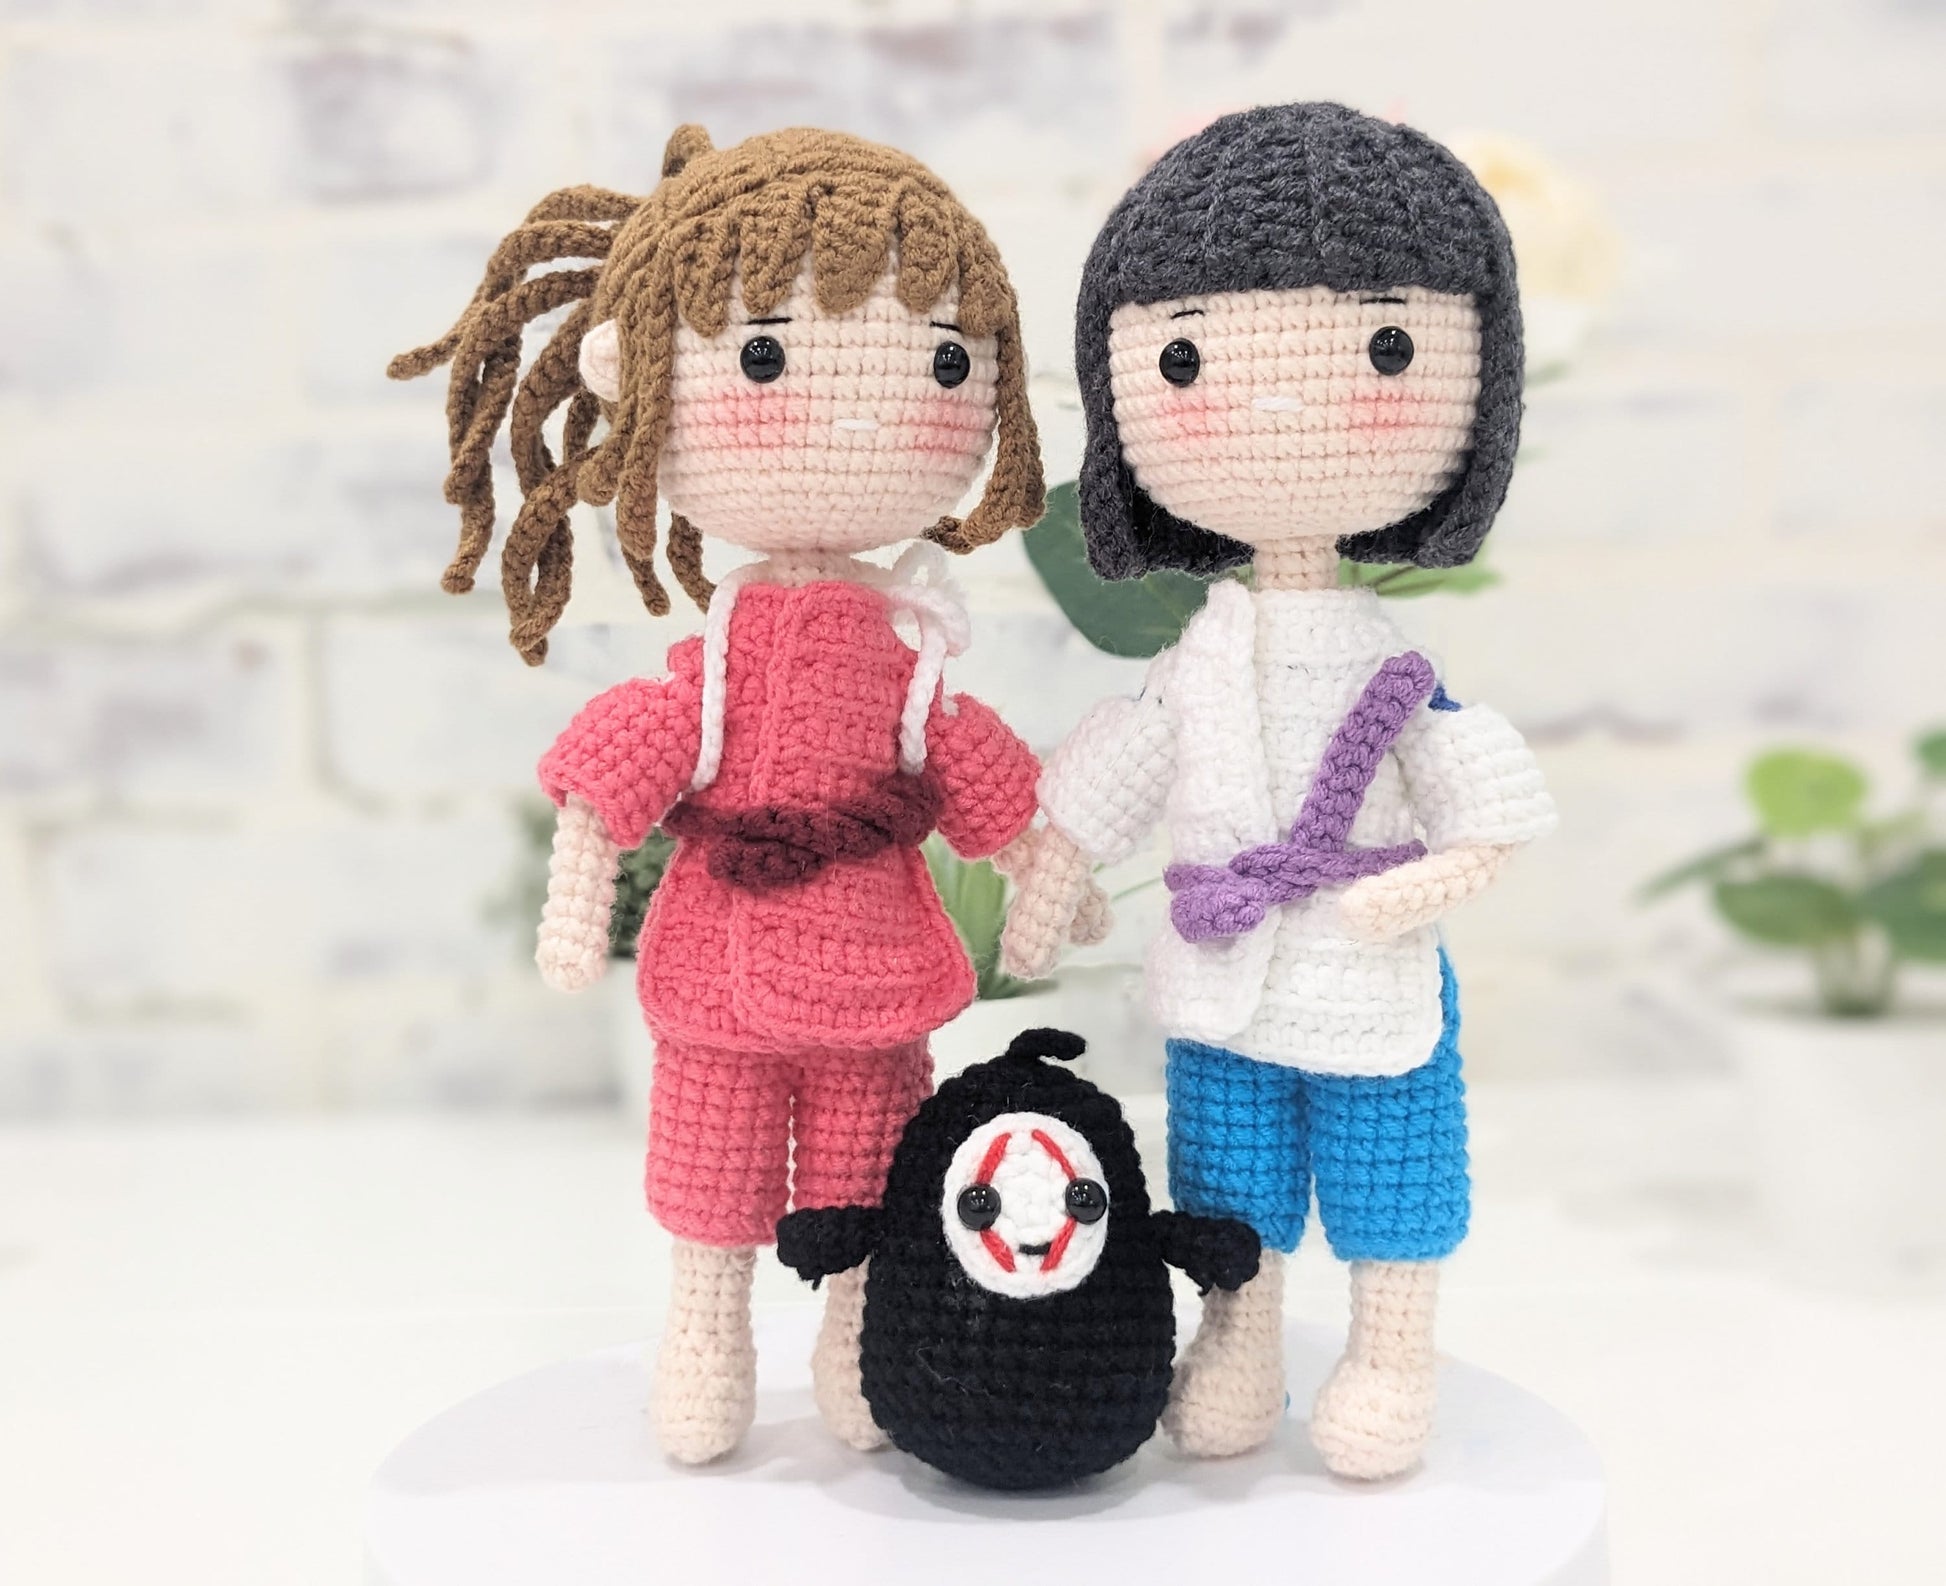 Dolls Amigurumi Patterns: Crochet Dolls Patterns with Clothing and  Accessories You'll Love: Cutest Crochet Doll Patterns to Make Today Book by  Lauren Montgomery